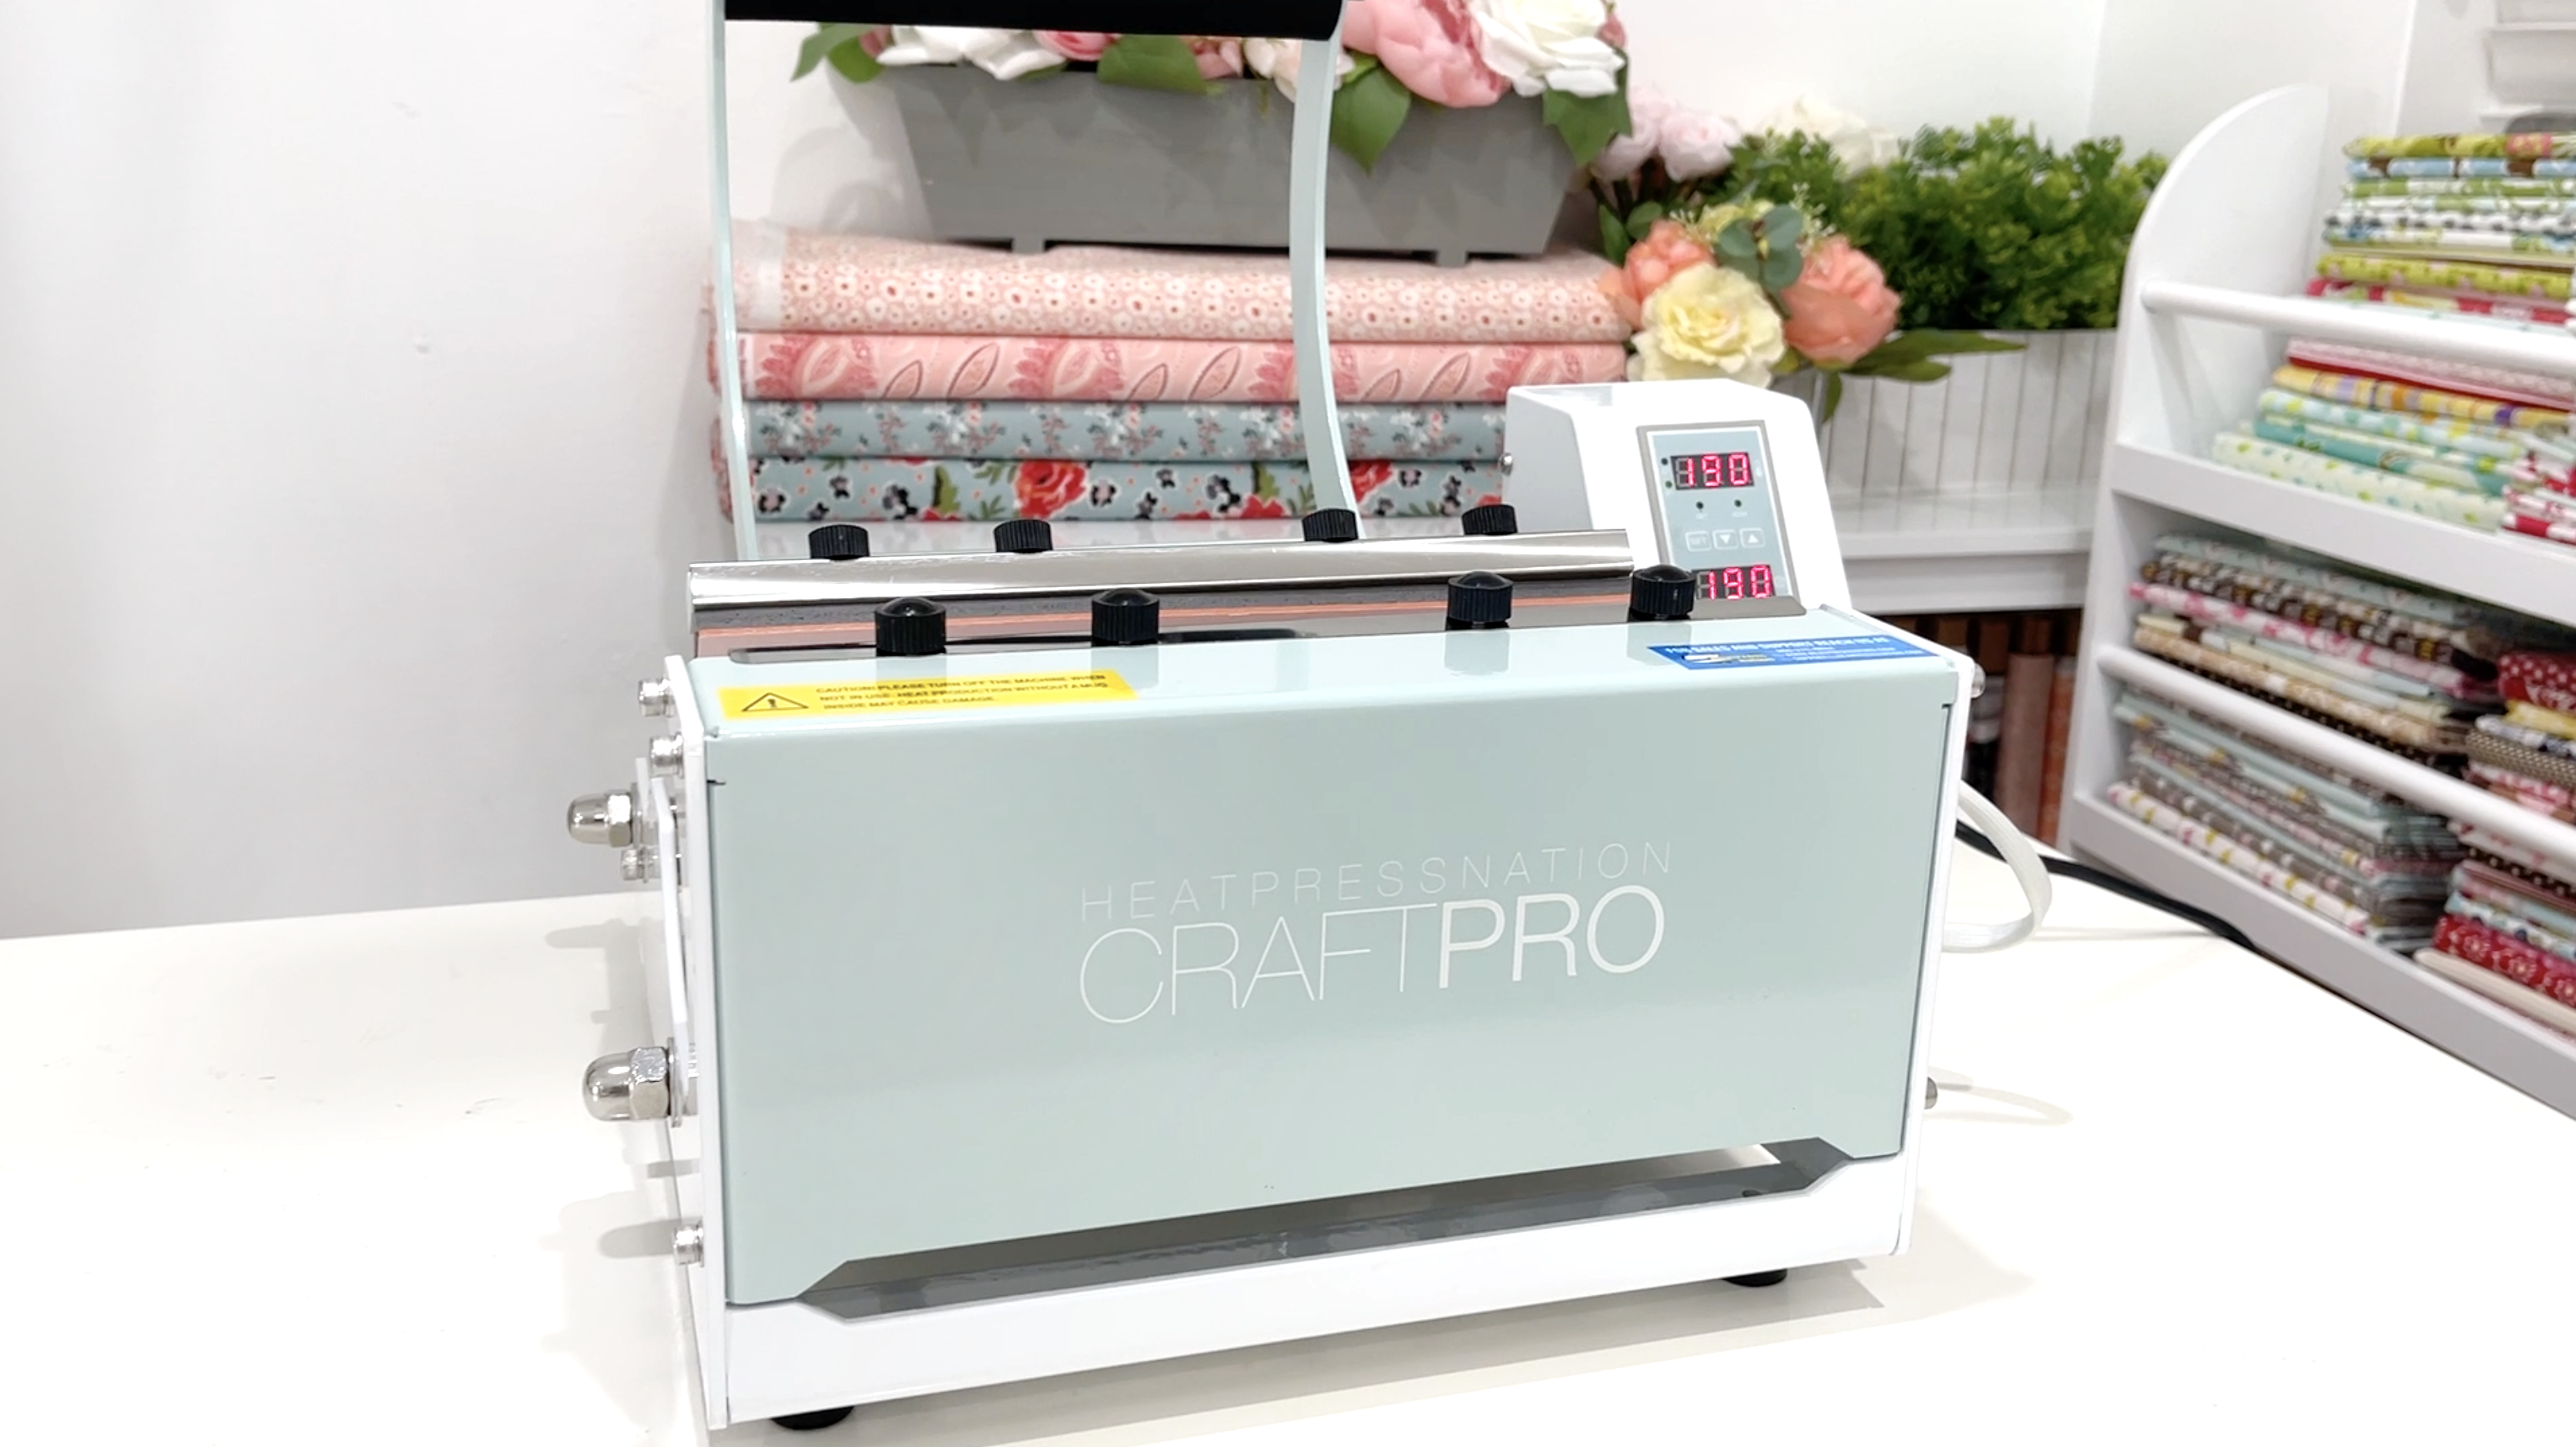 New Mint and Pink CraftPro Press available at Heat Press Nation 